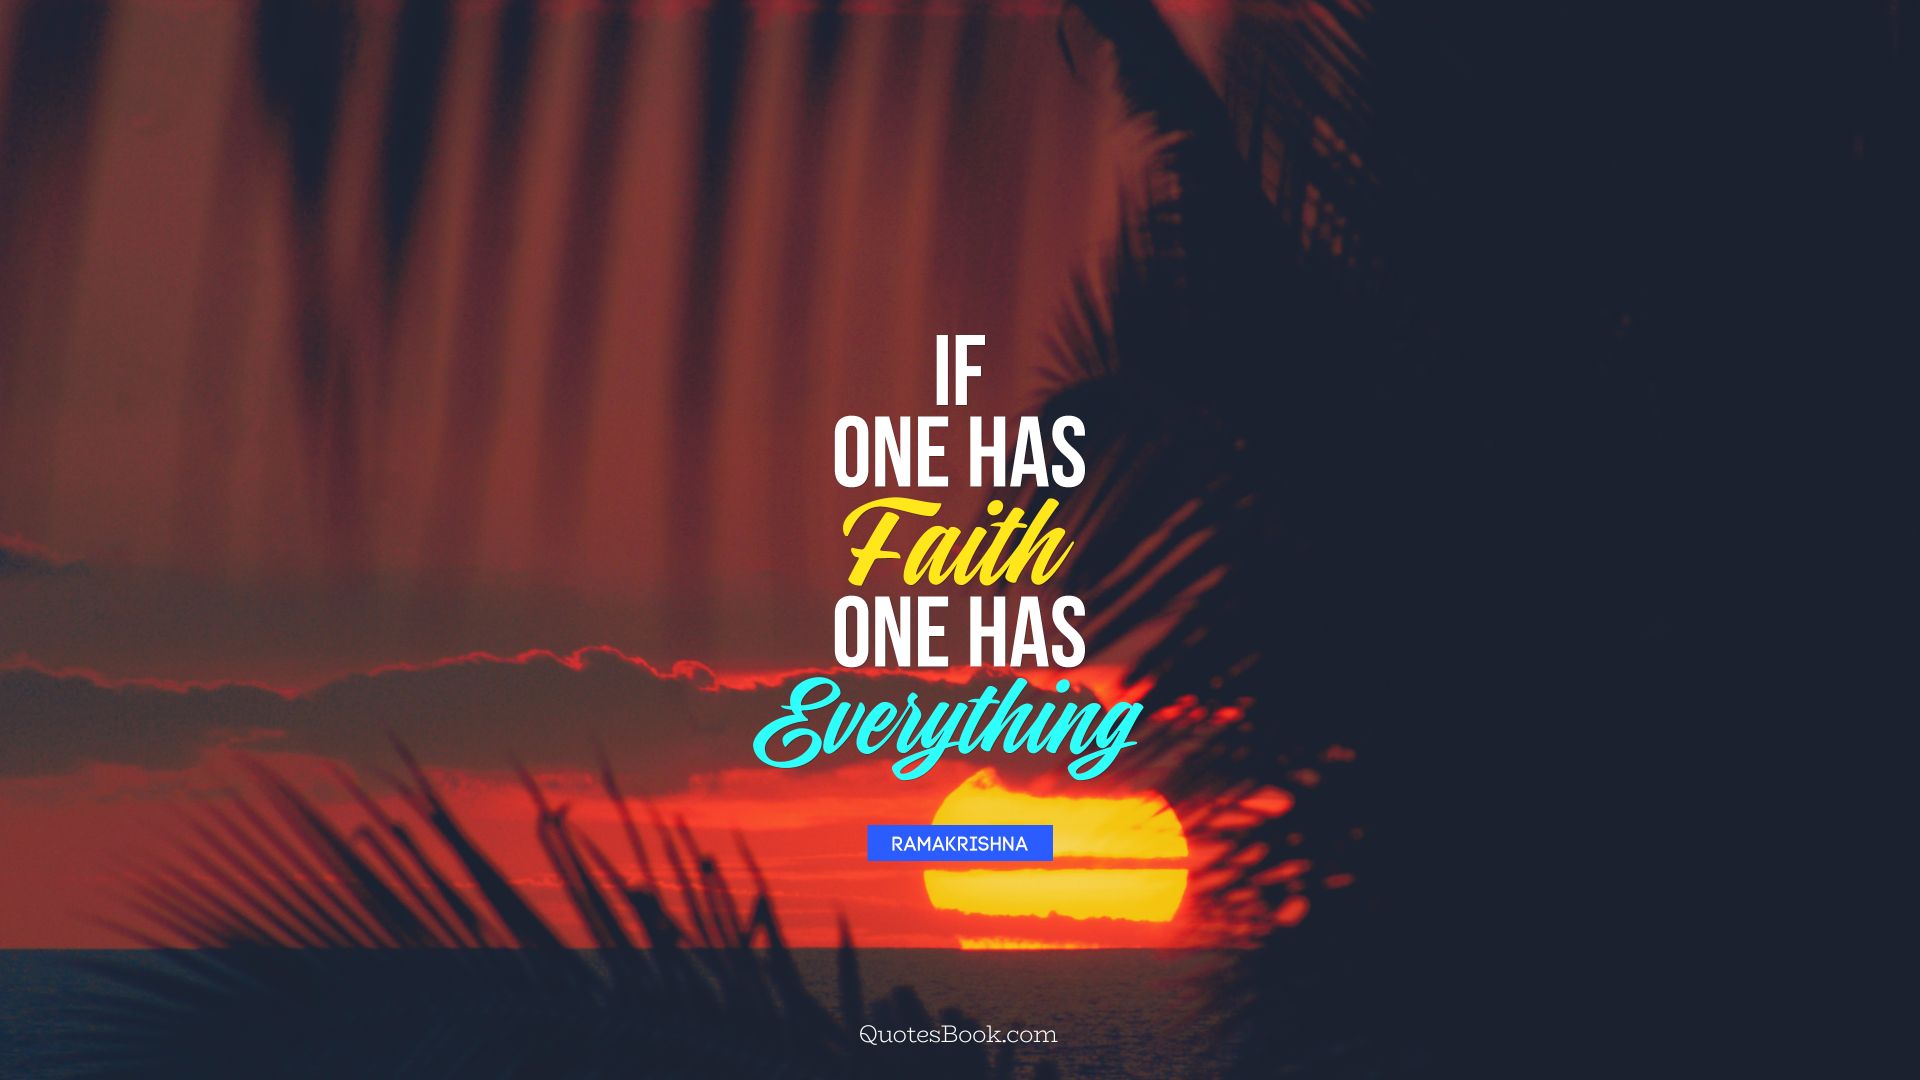 If one has faith one has everything. - Quote by Ramakrishna